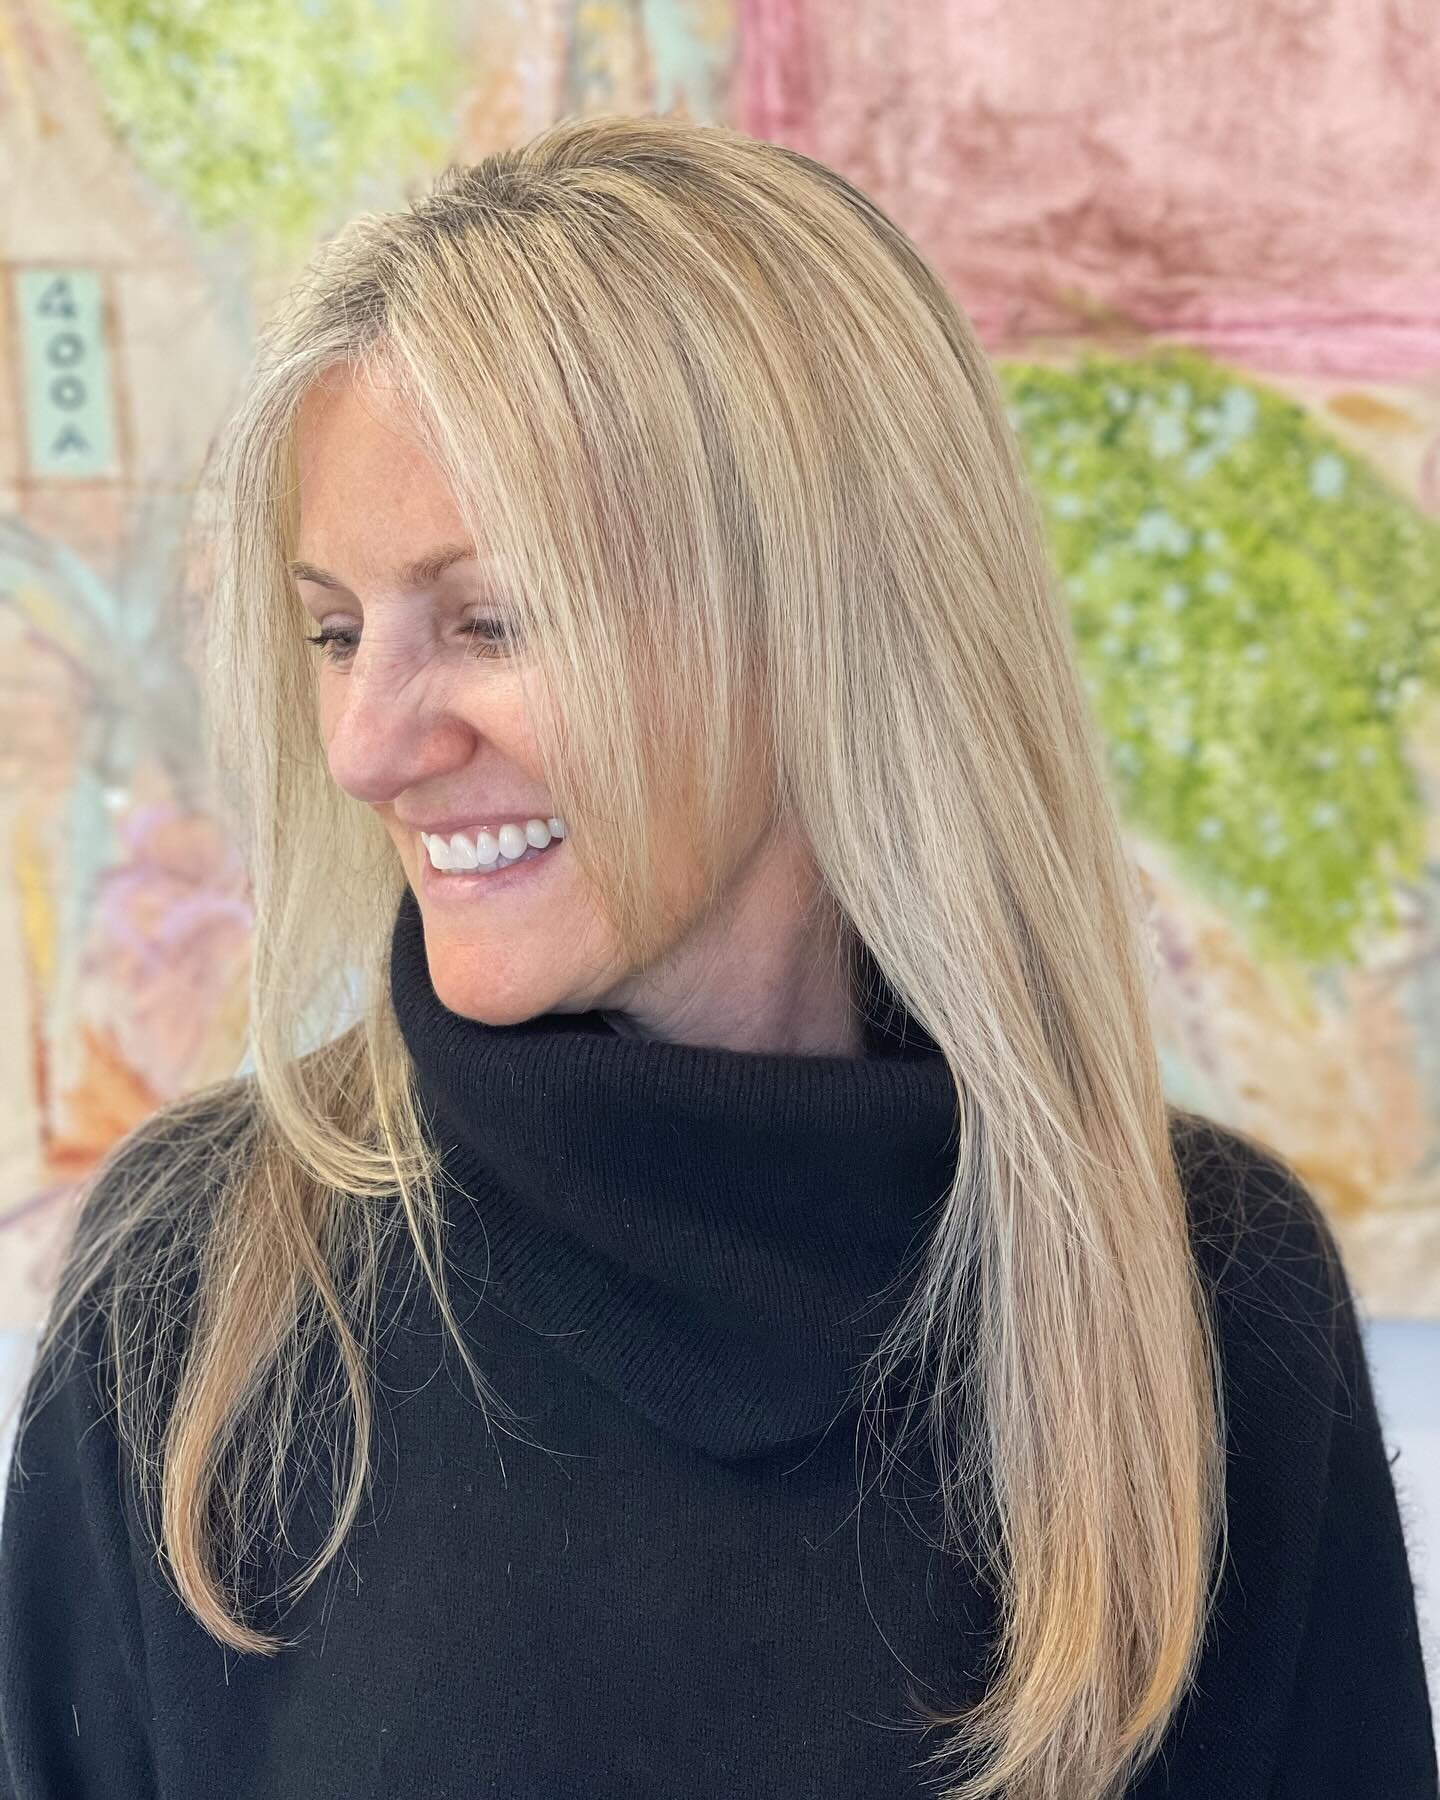 ✨Natural-looking, enhanced blonde✨ to brighten up this rainy Wednesday.

Senior Stylist Adam has that sixth sense for perfecting highlight placement and tone formulation. Book with one of our blonde experts today! 💫